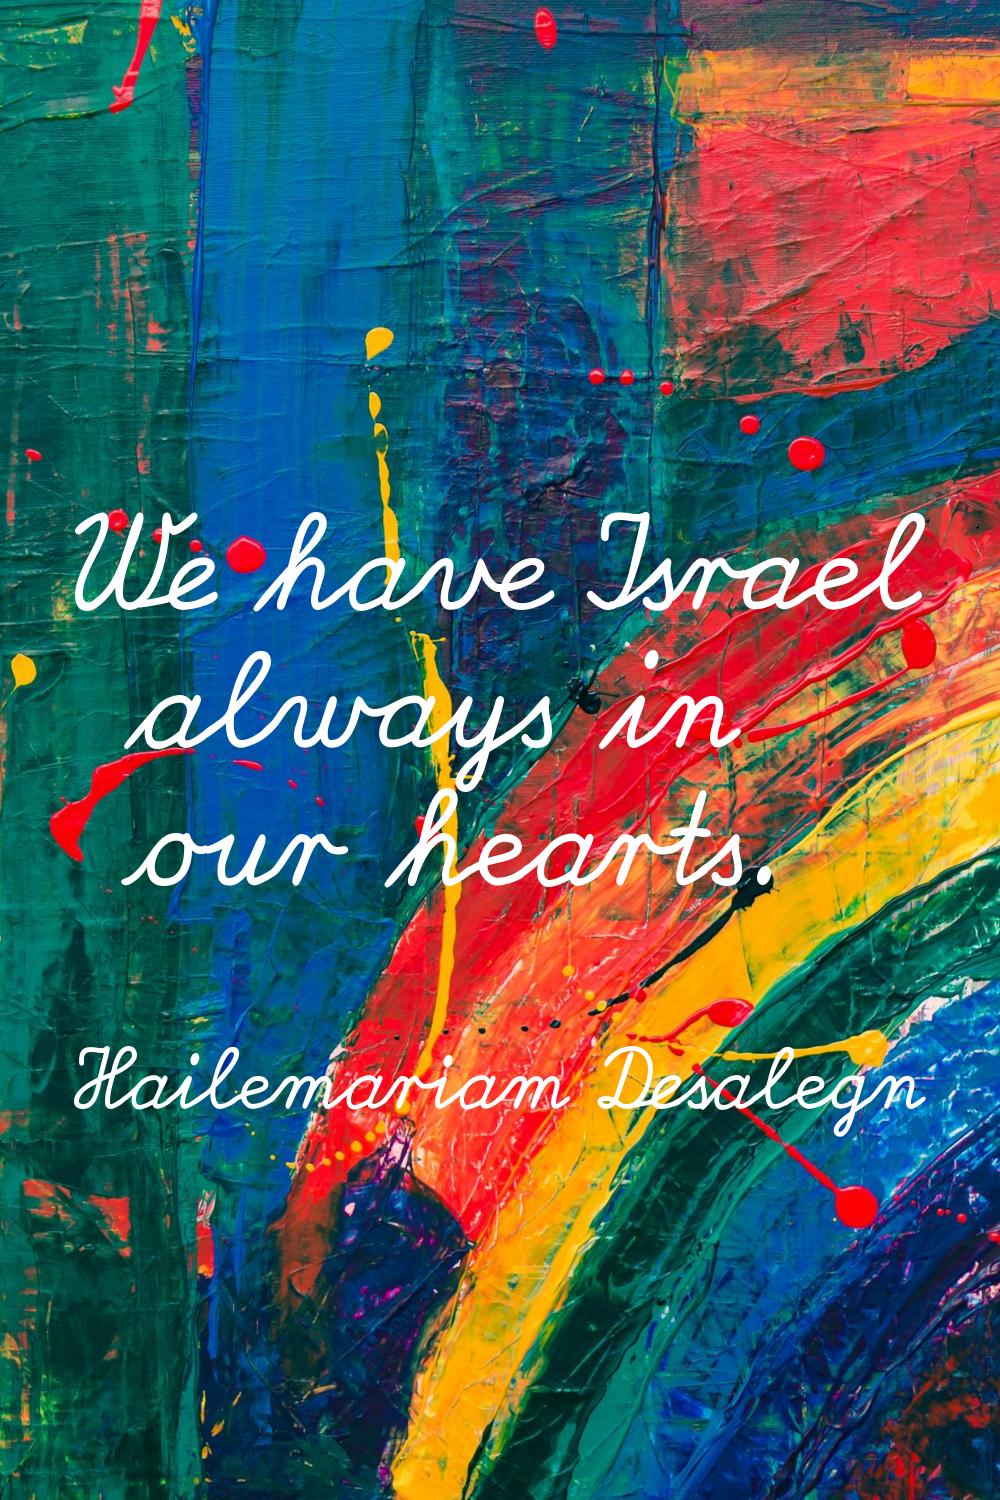 We have Israel always in our hearts.